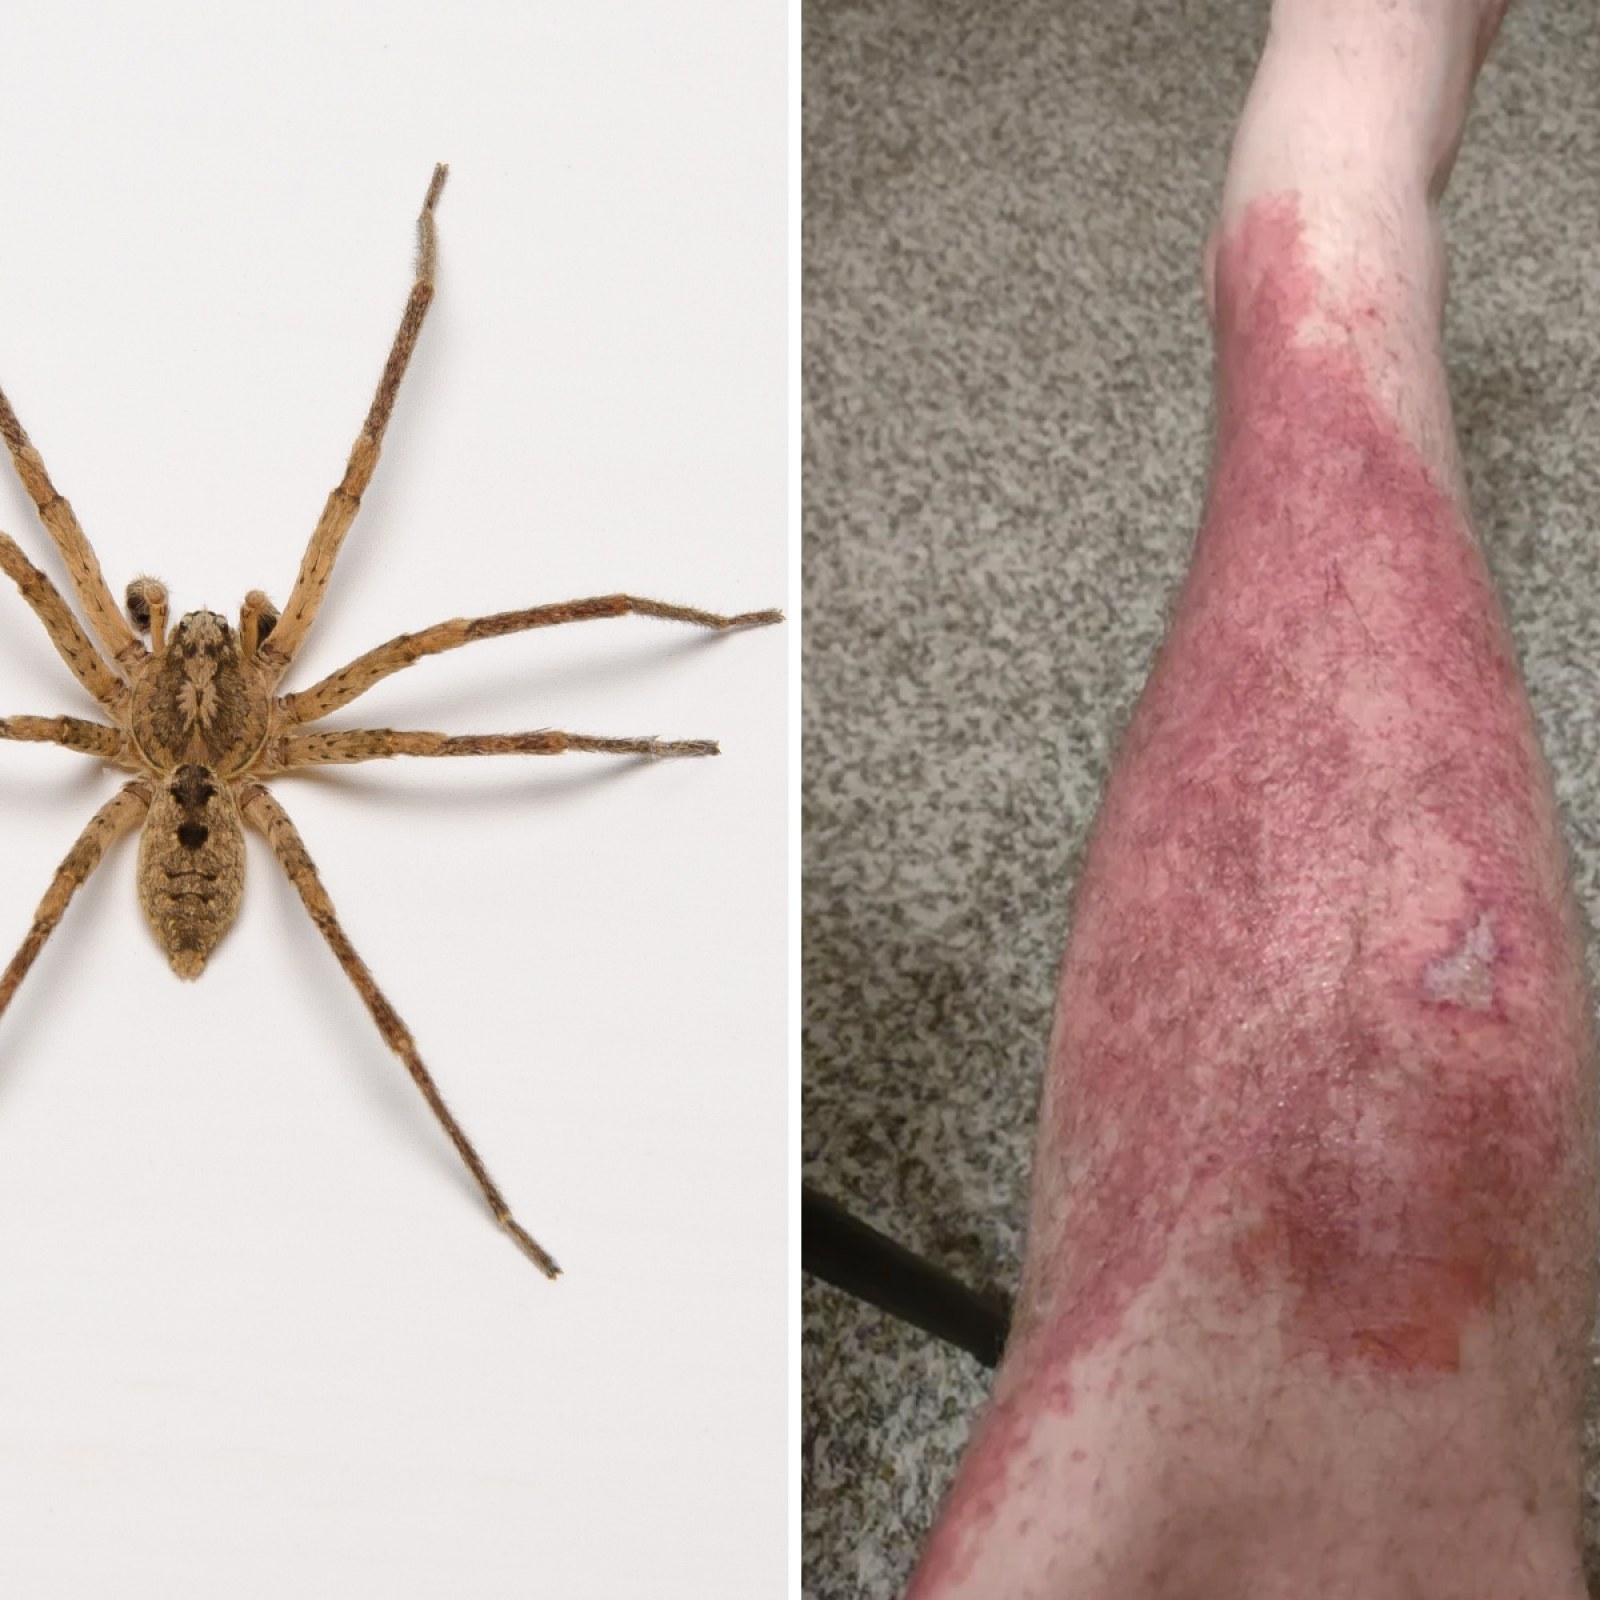 How to Treat a Spider Bite: What Spiders Bites Are the Most Dangerous